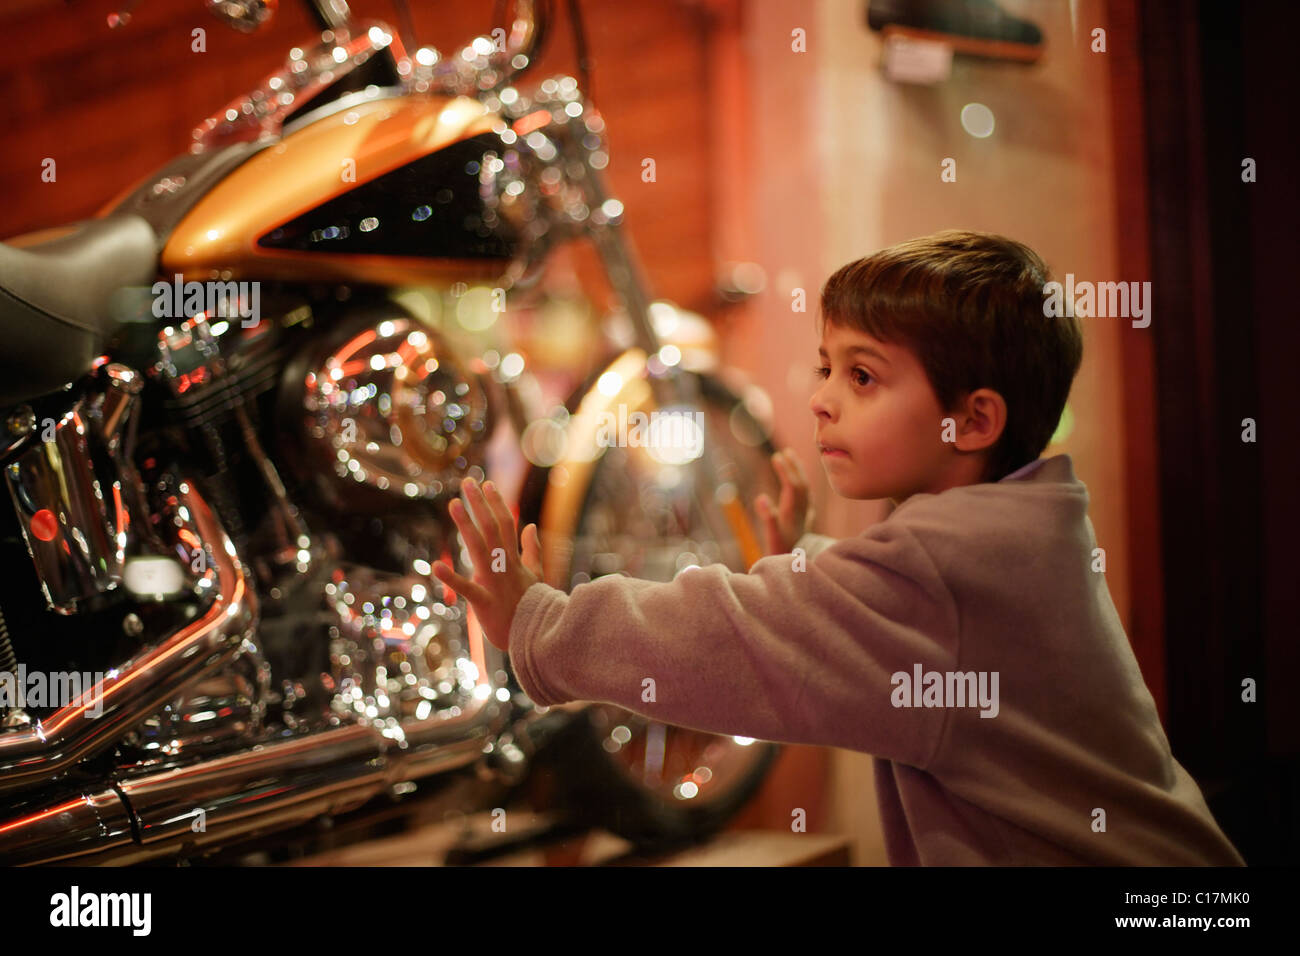 boy looks through shop window at motorcycles Stock Photo